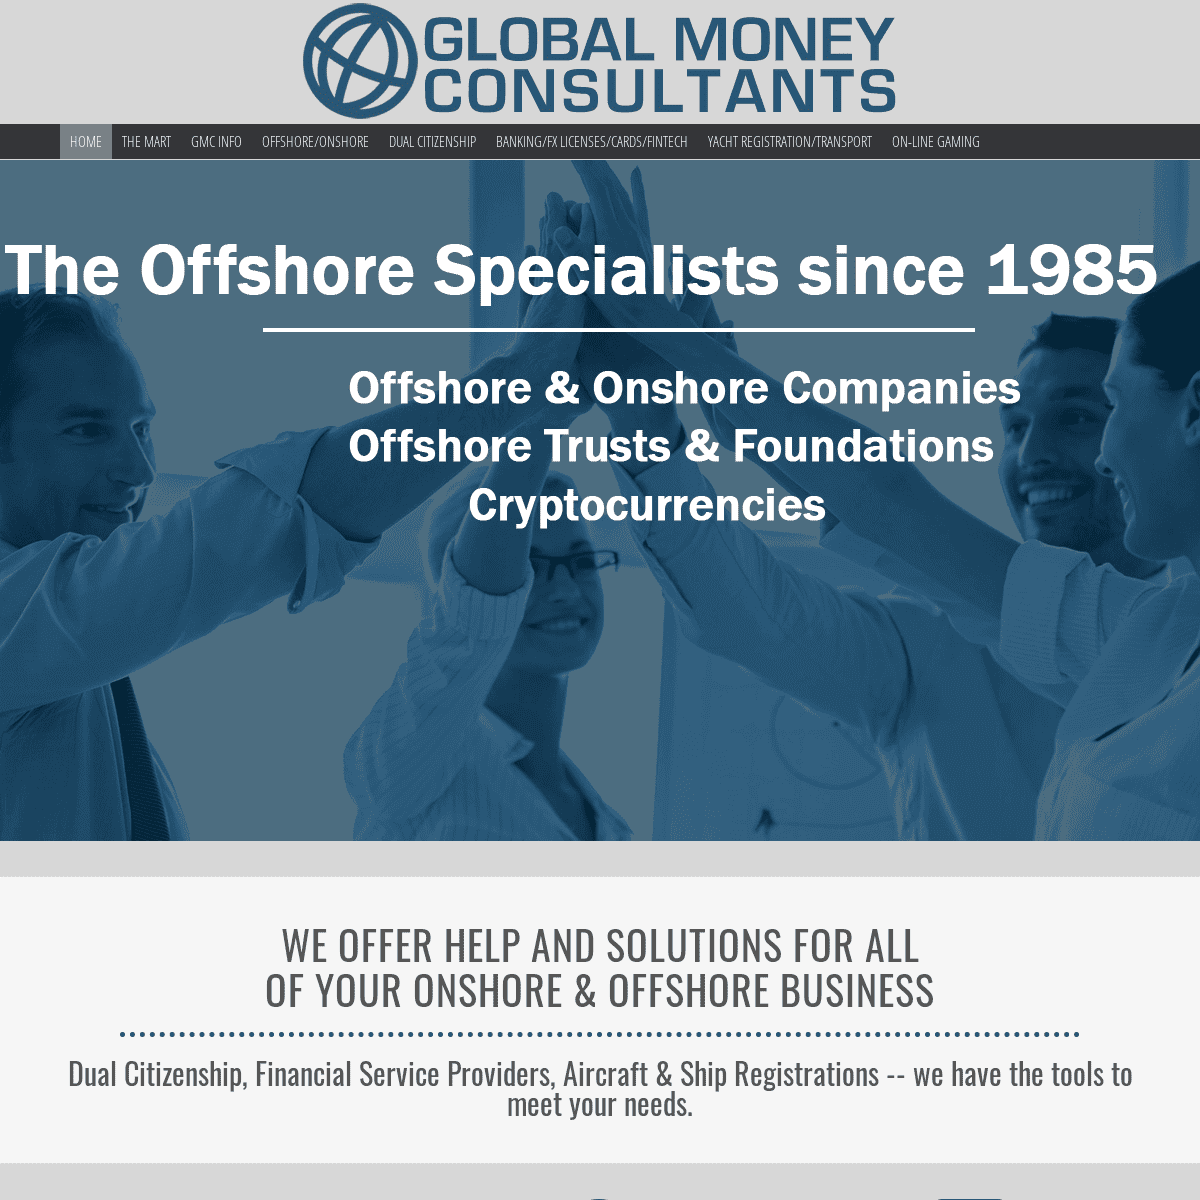 Global Money Consultants – Your Offshore Specialists